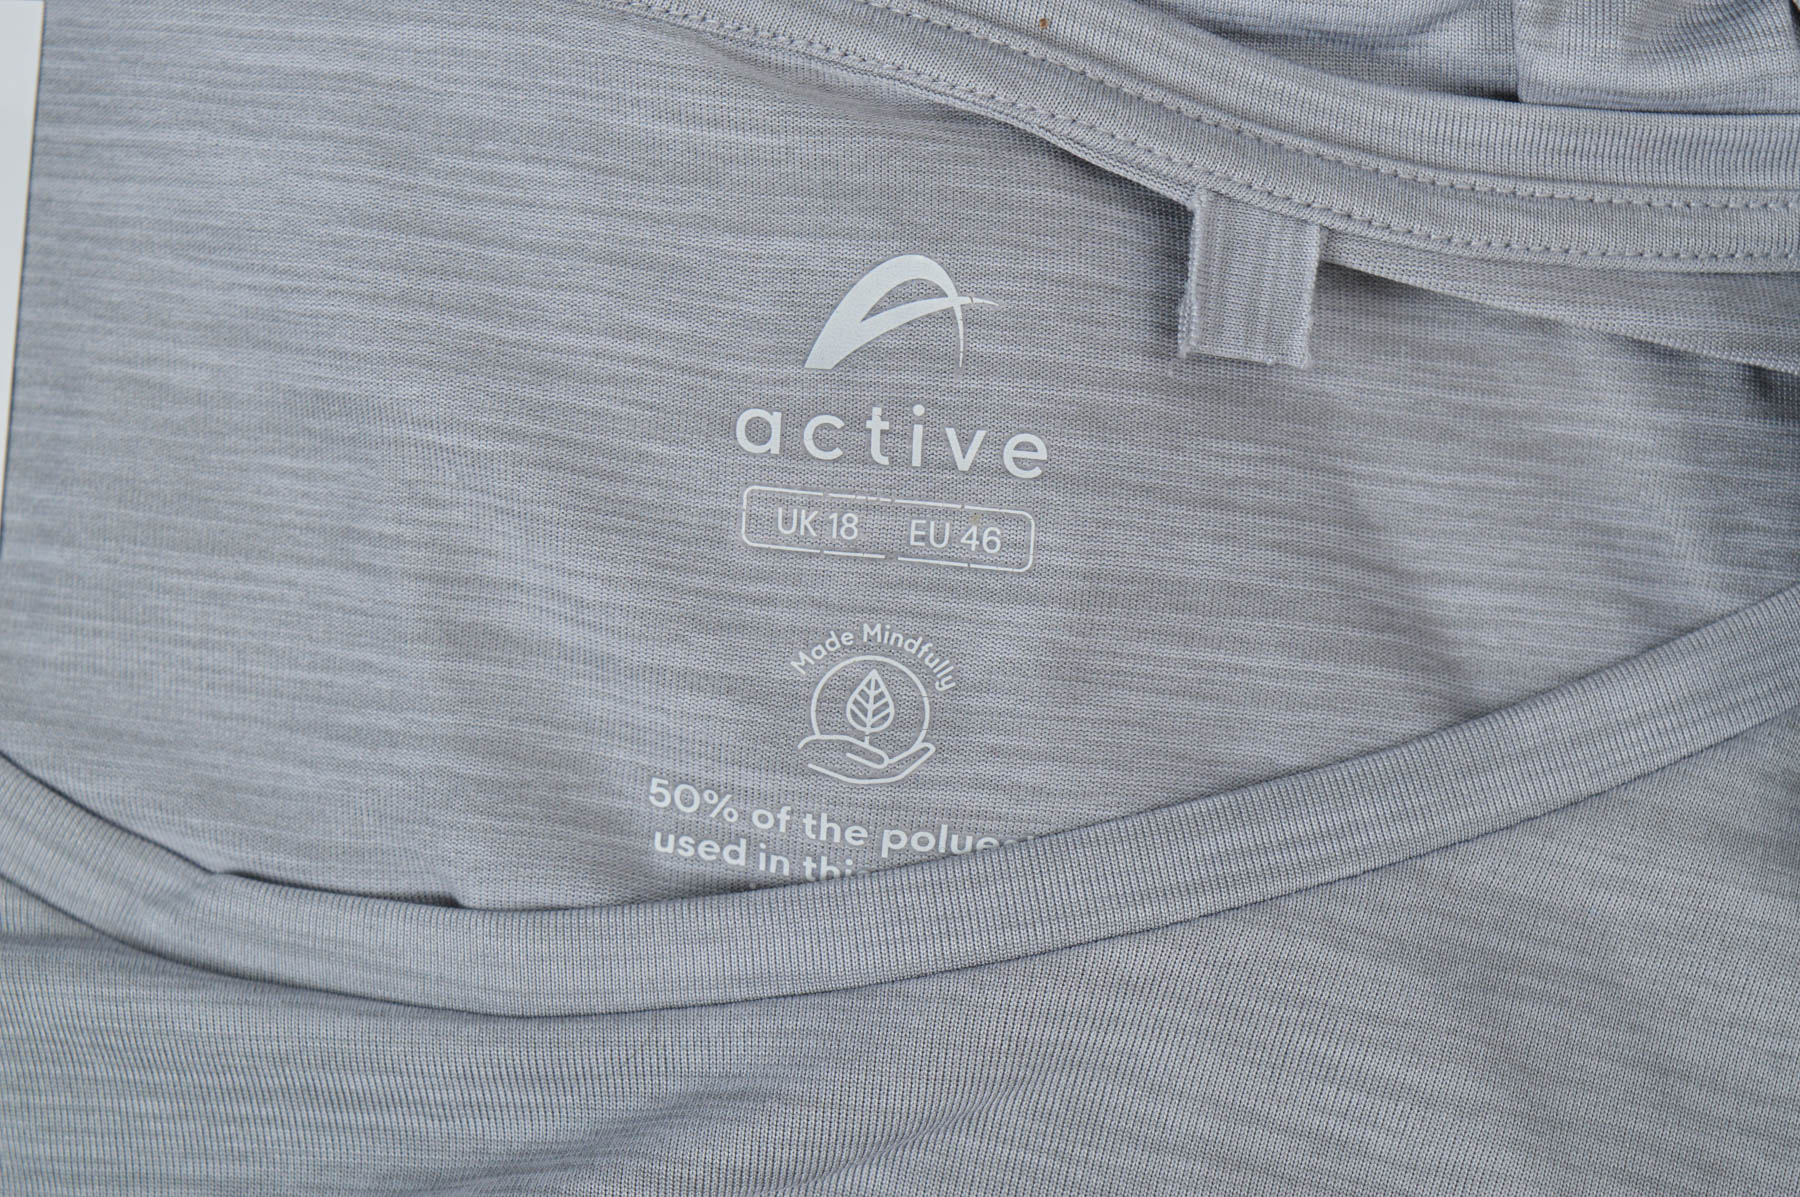 Women's blouse - Active by F&F - 2